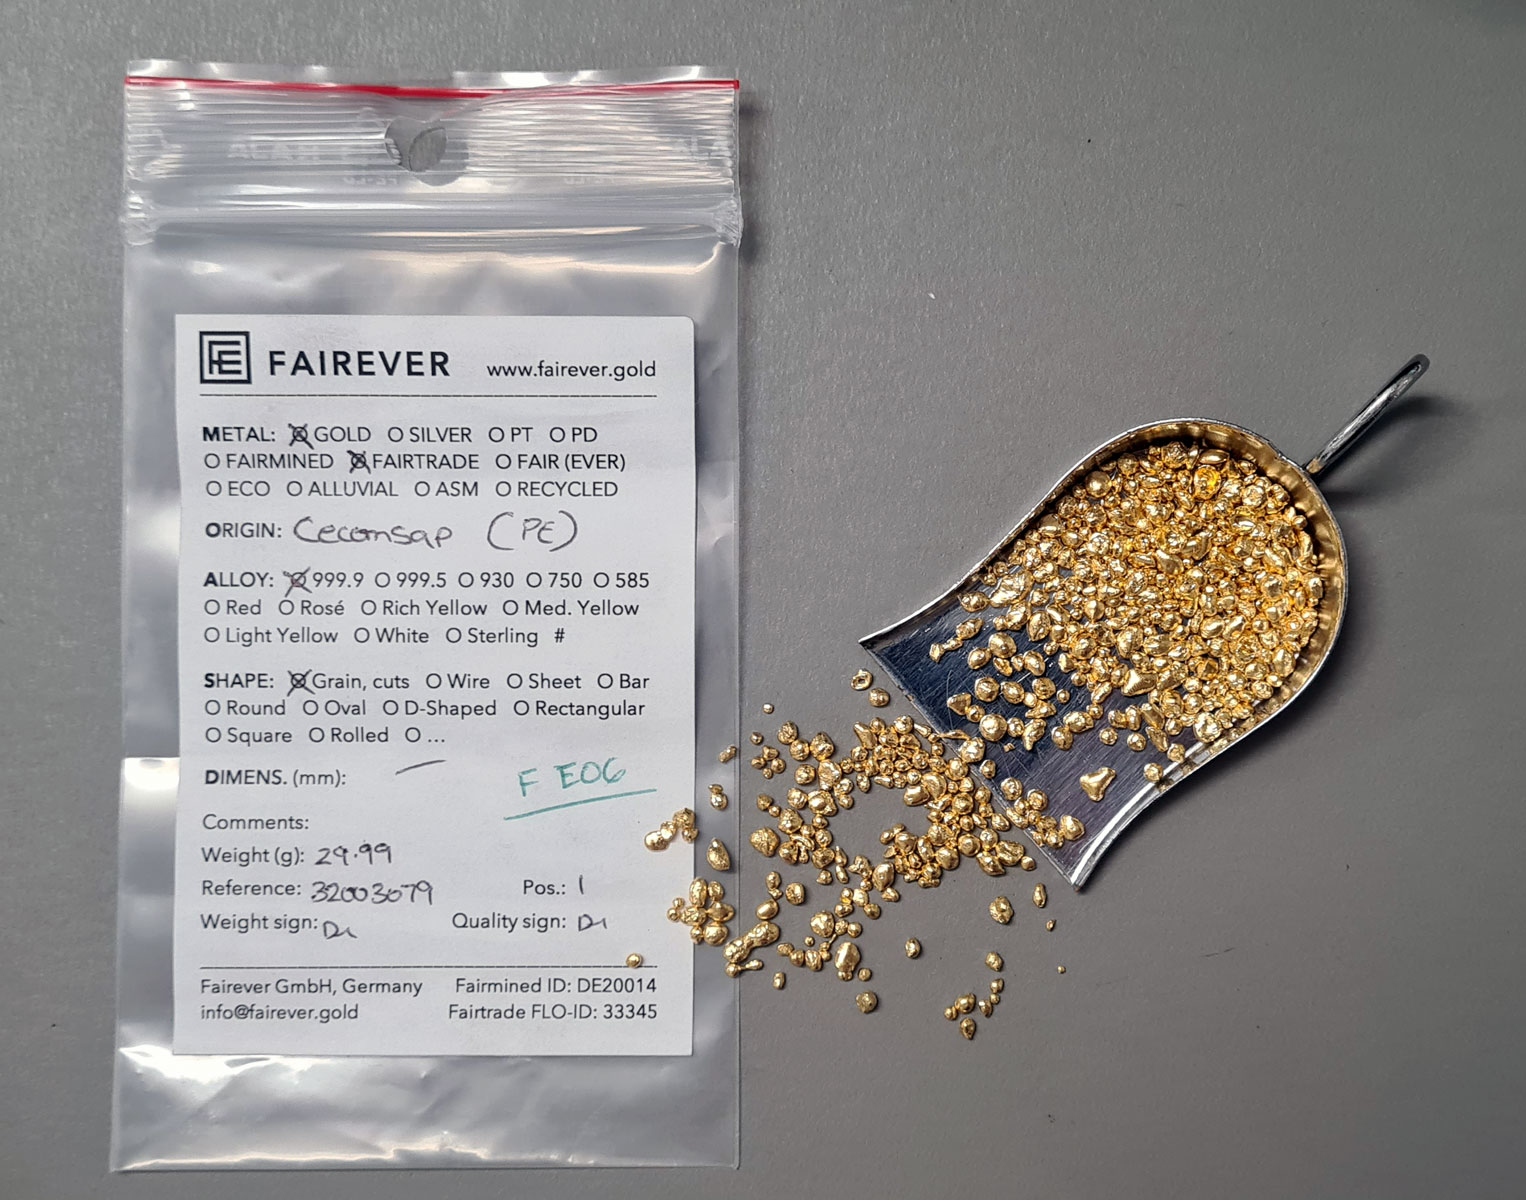 Pure gold grain overflowing from a silver-coloured metal scoop onto a plastic baggie labelled 